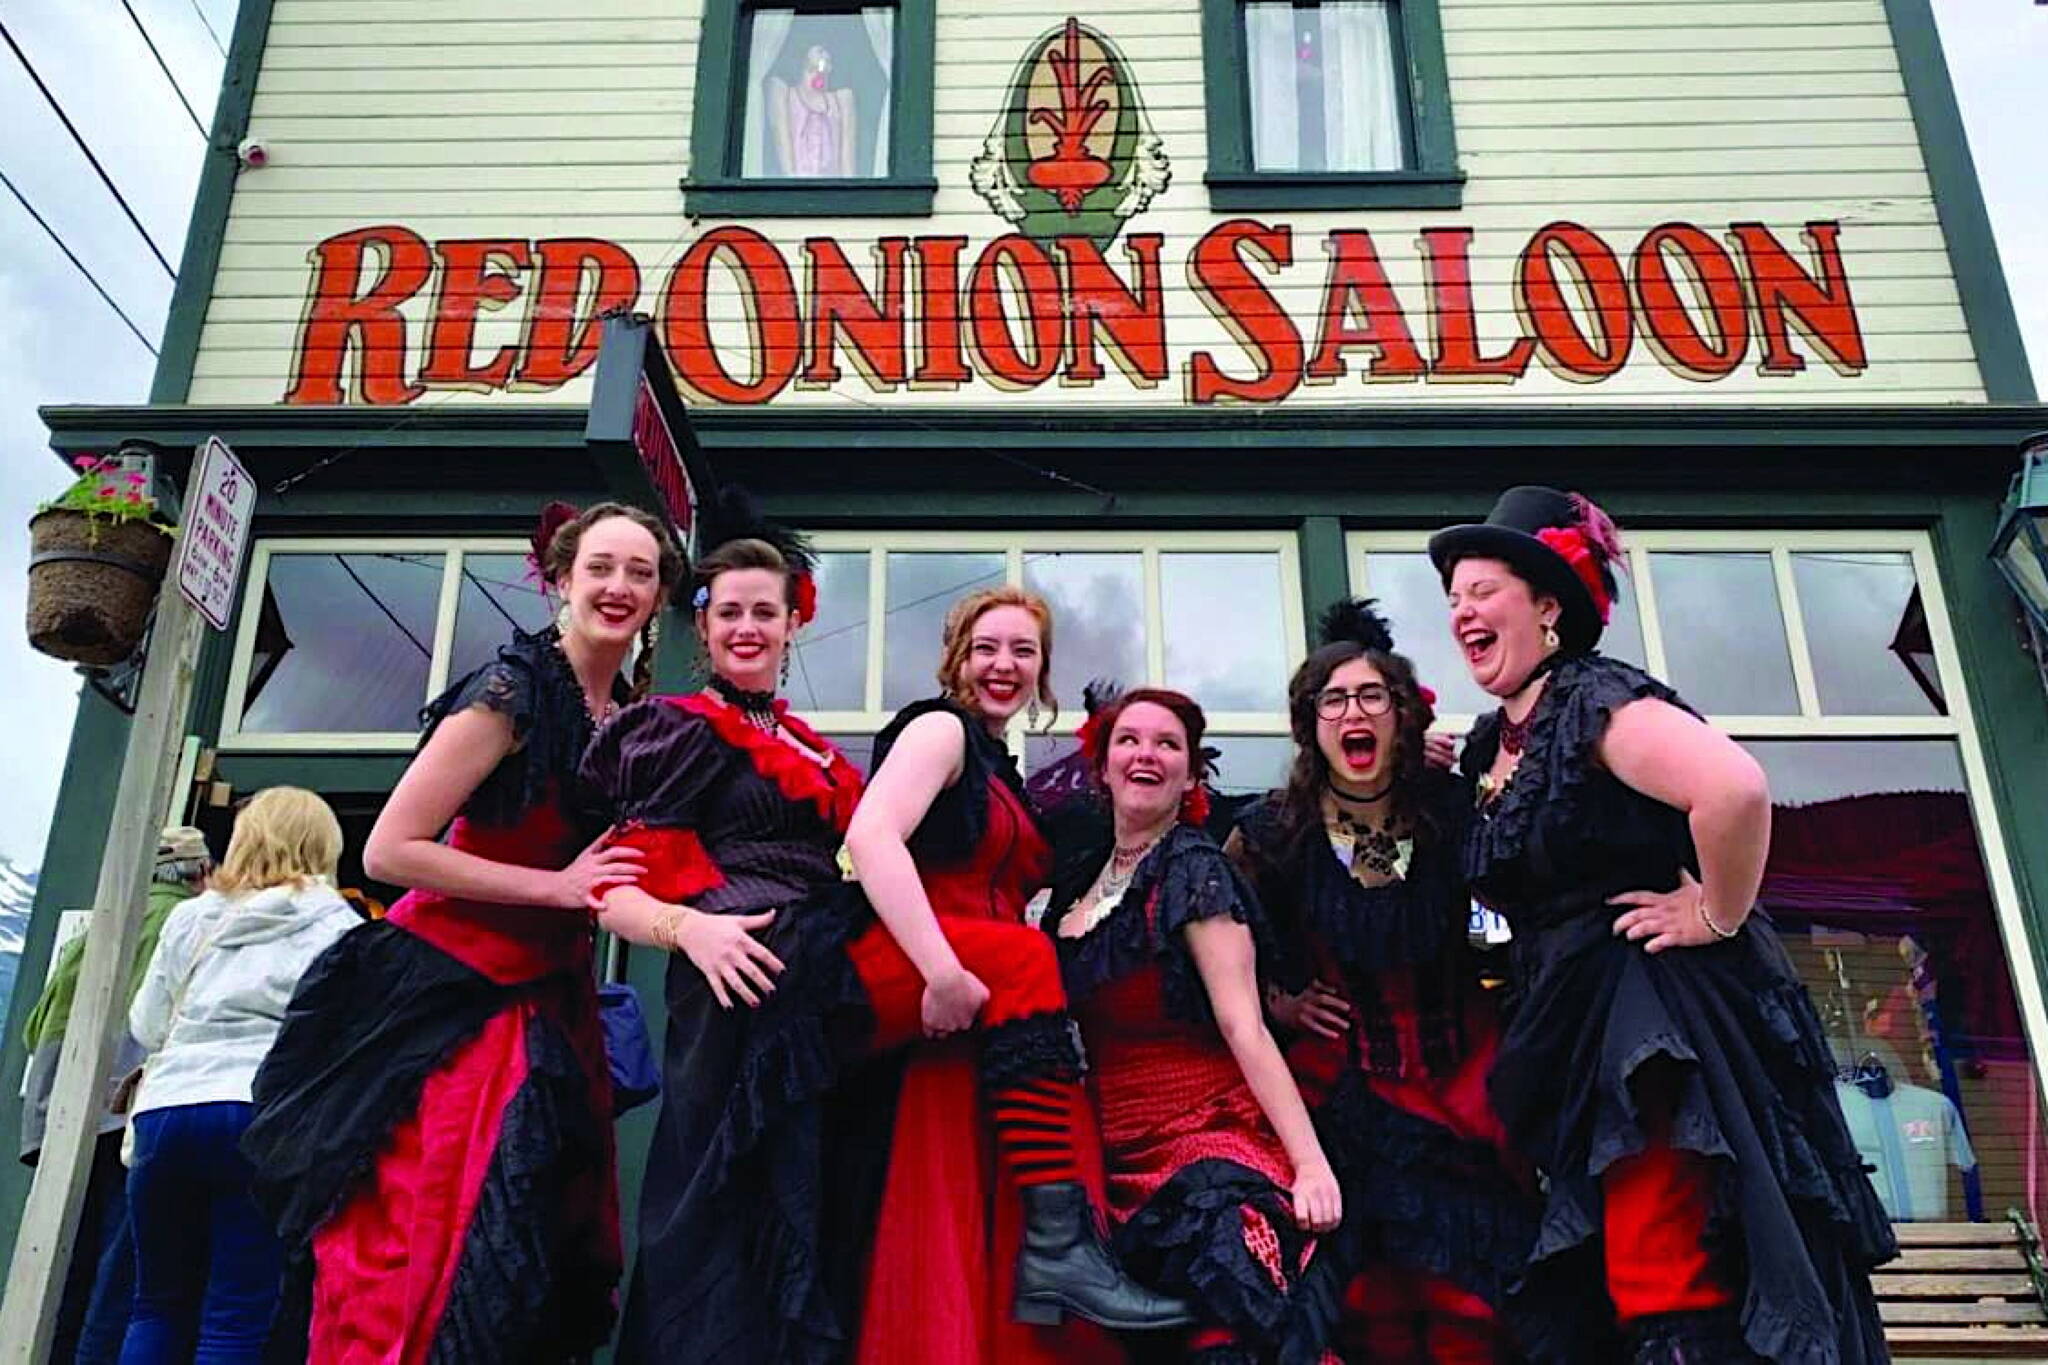 Employees gather in front the historic Red Onion Saloon in Skagway, which will be taken over by Juneau restaurant owner Tracy LaBarge at the end of the summer tourism season. (Photo courtesy of the Red Onion Saloon)